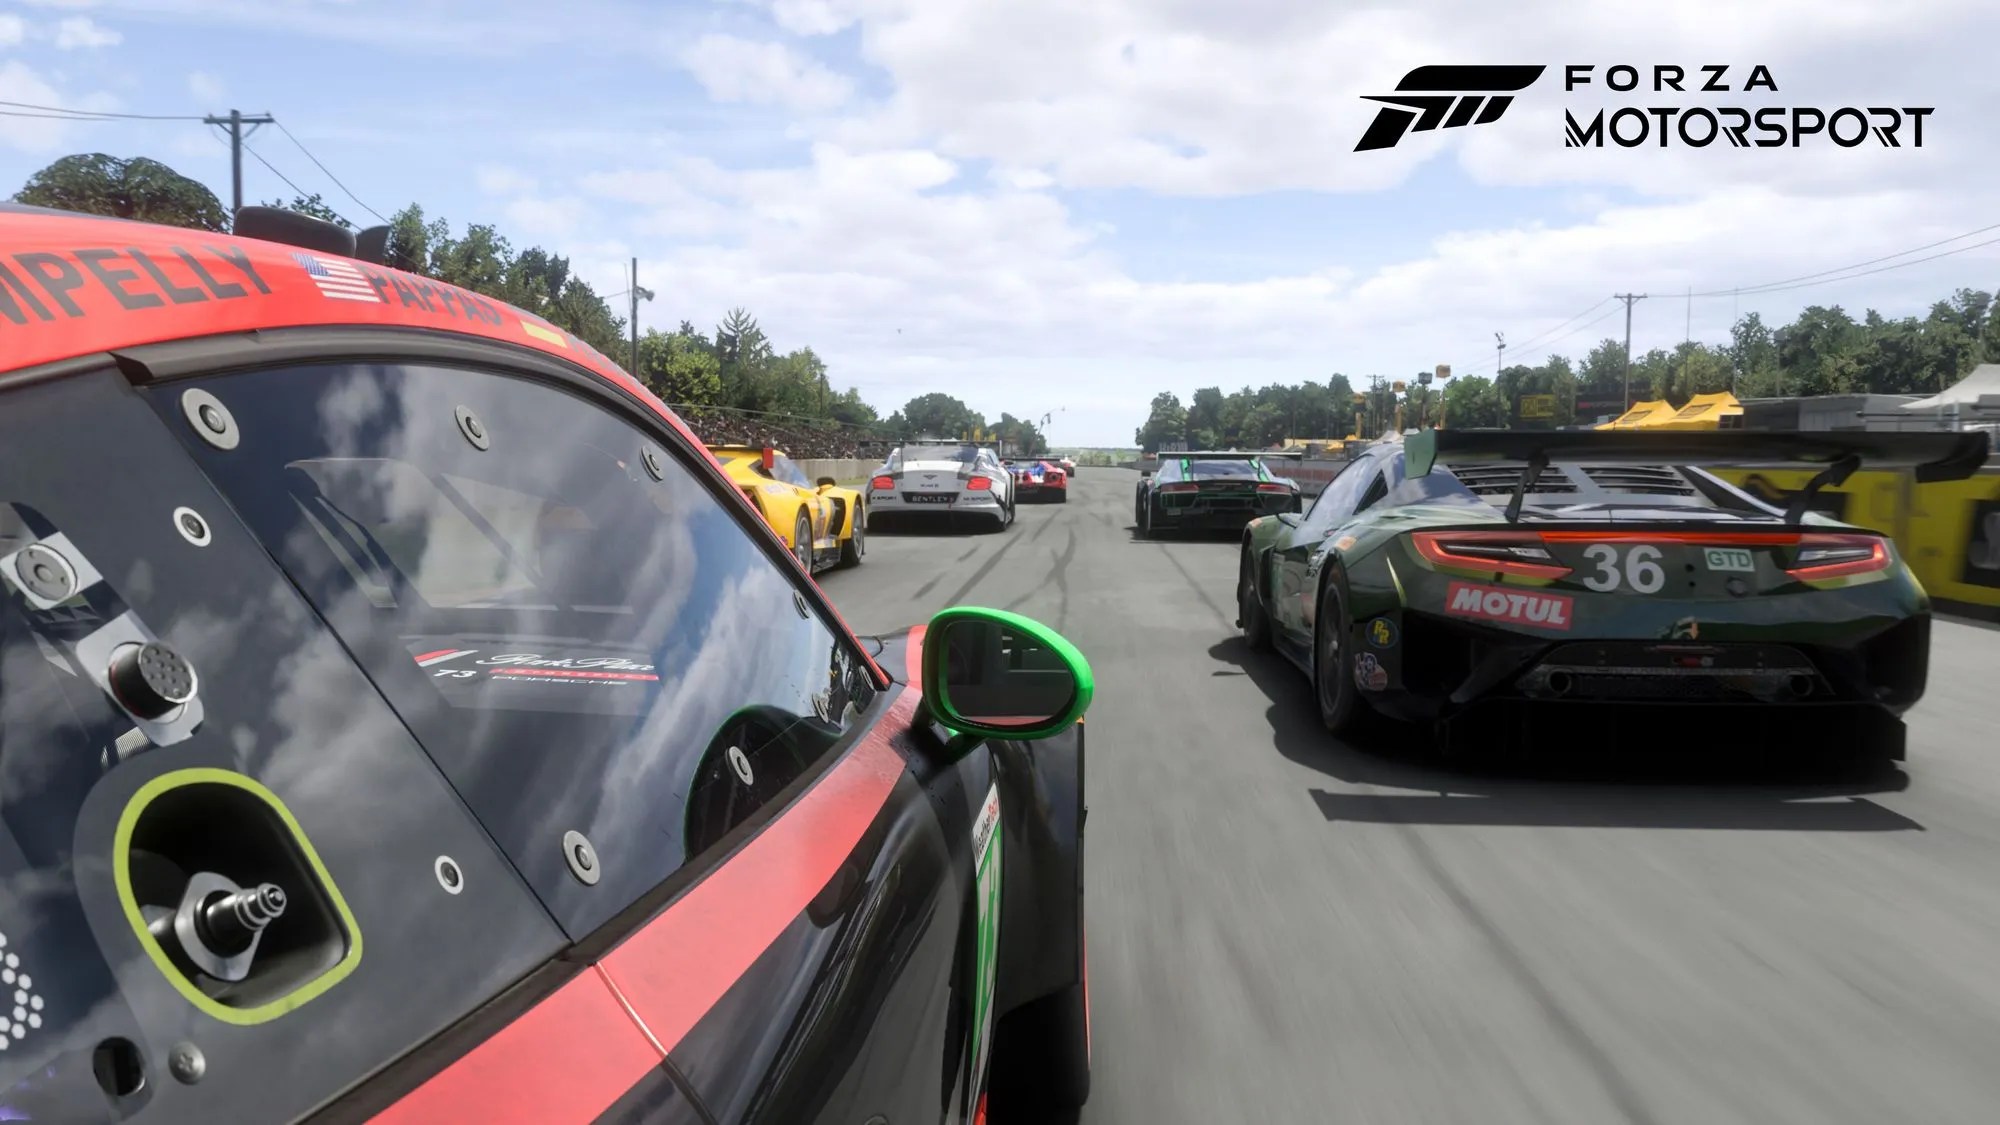 And there we have it! #ForzaMotorsport Early Access is now